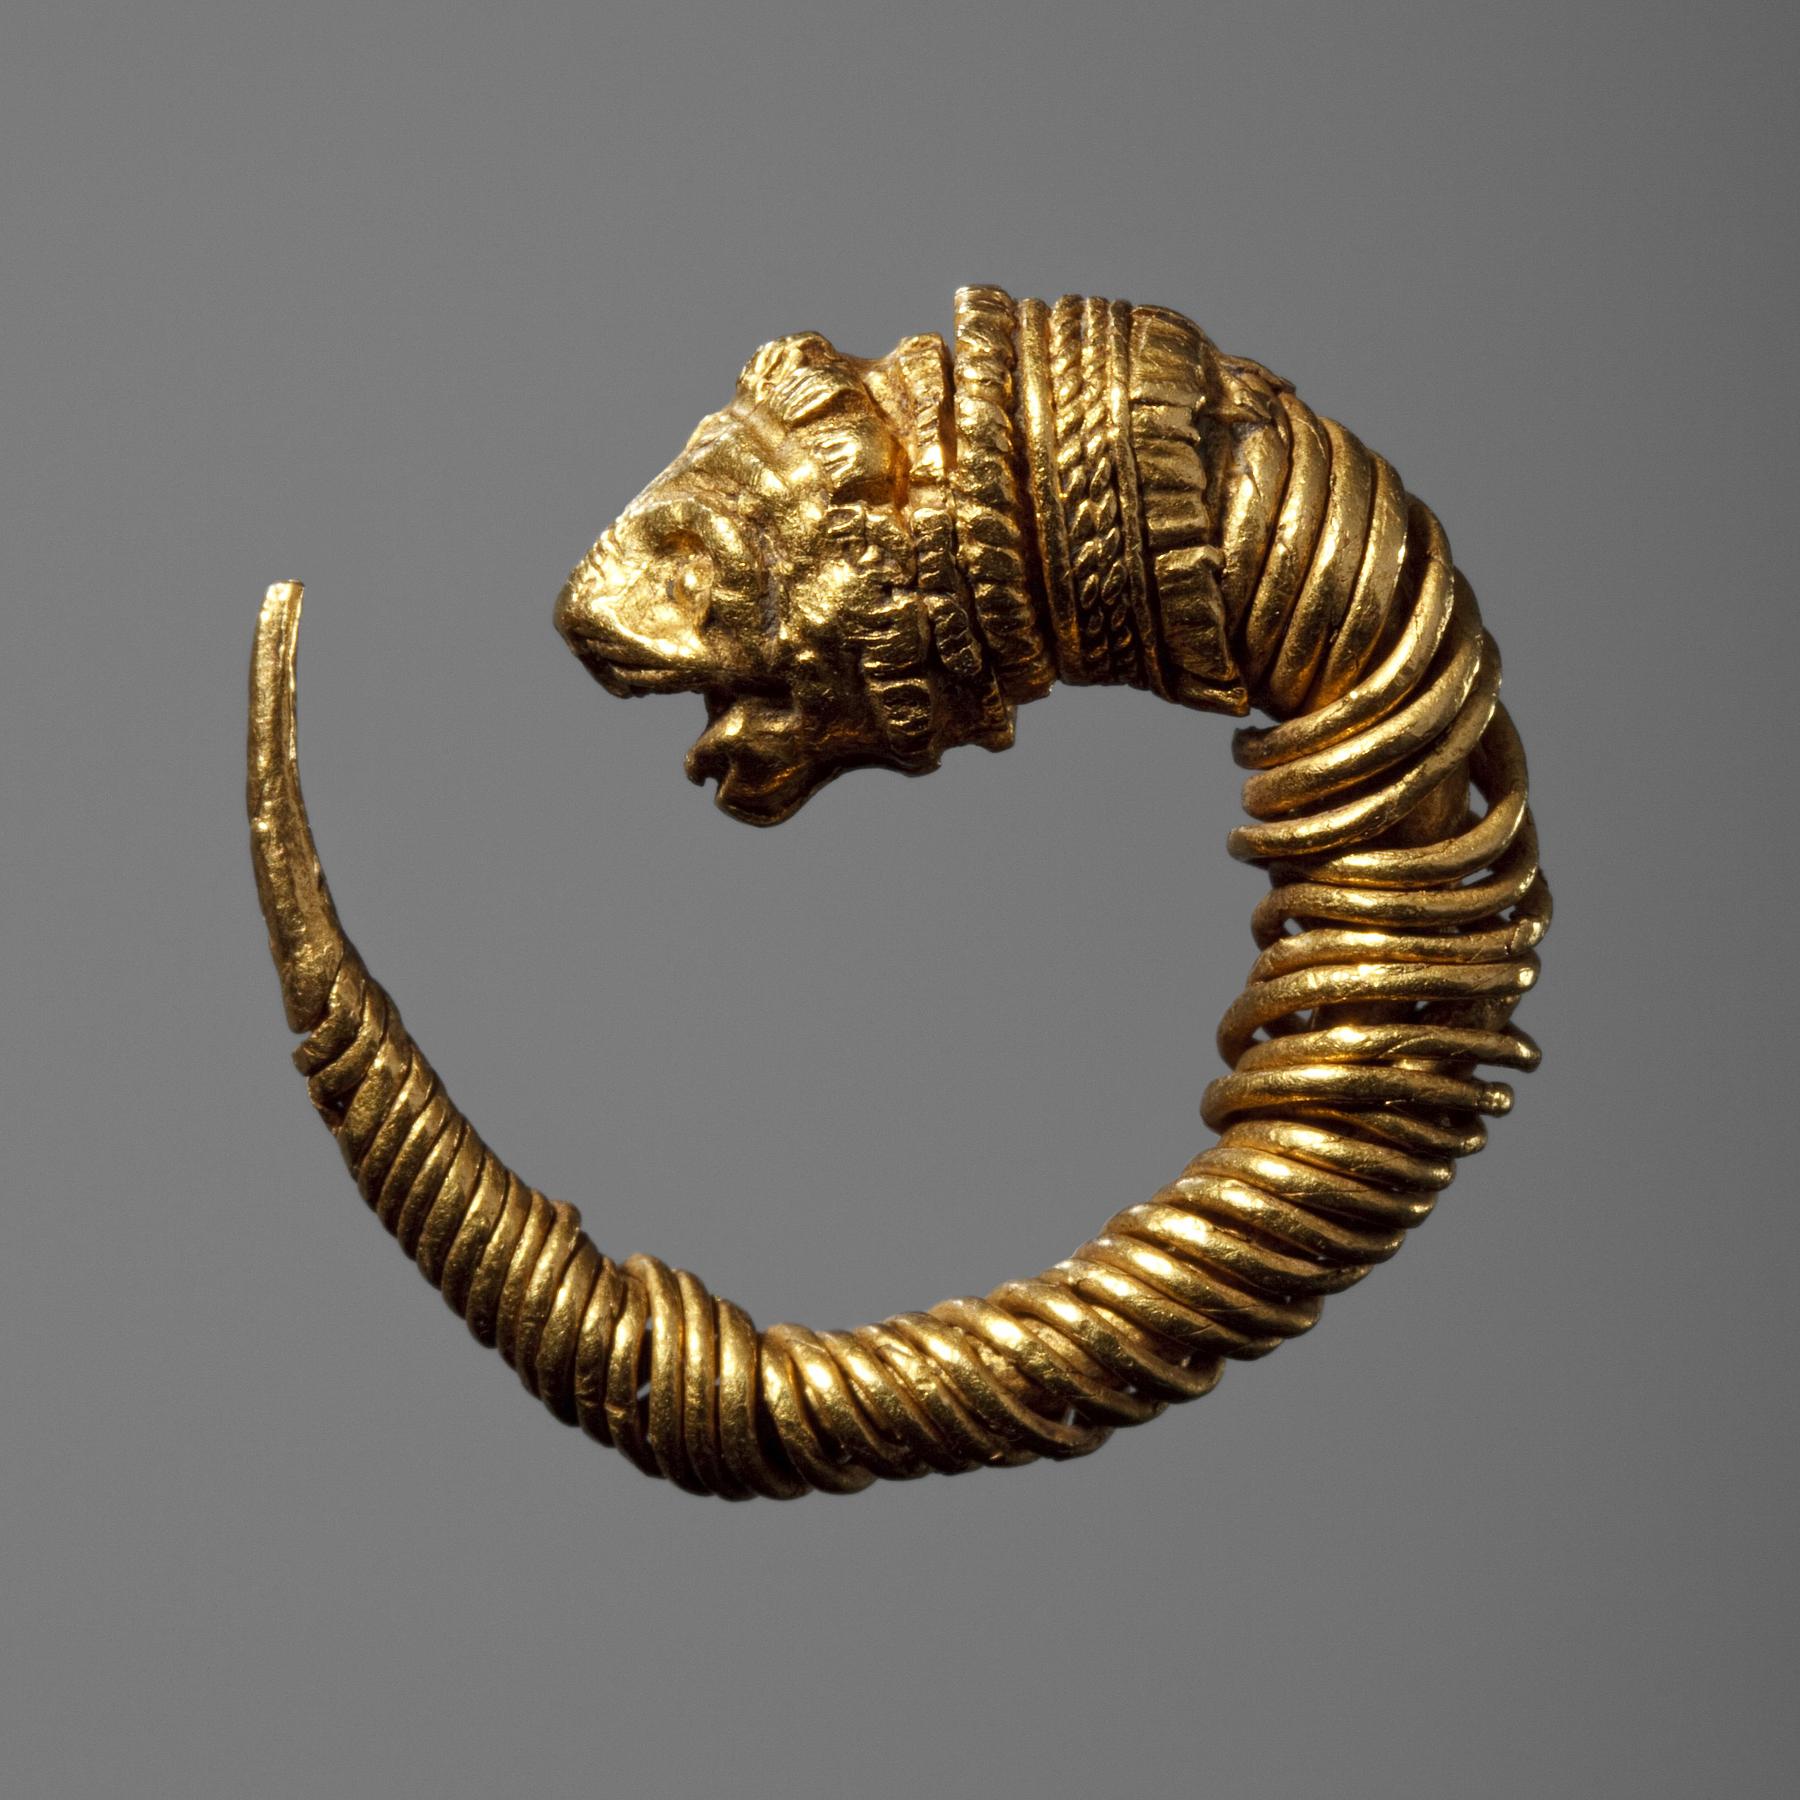 Ear ring with a lions' head, H1839